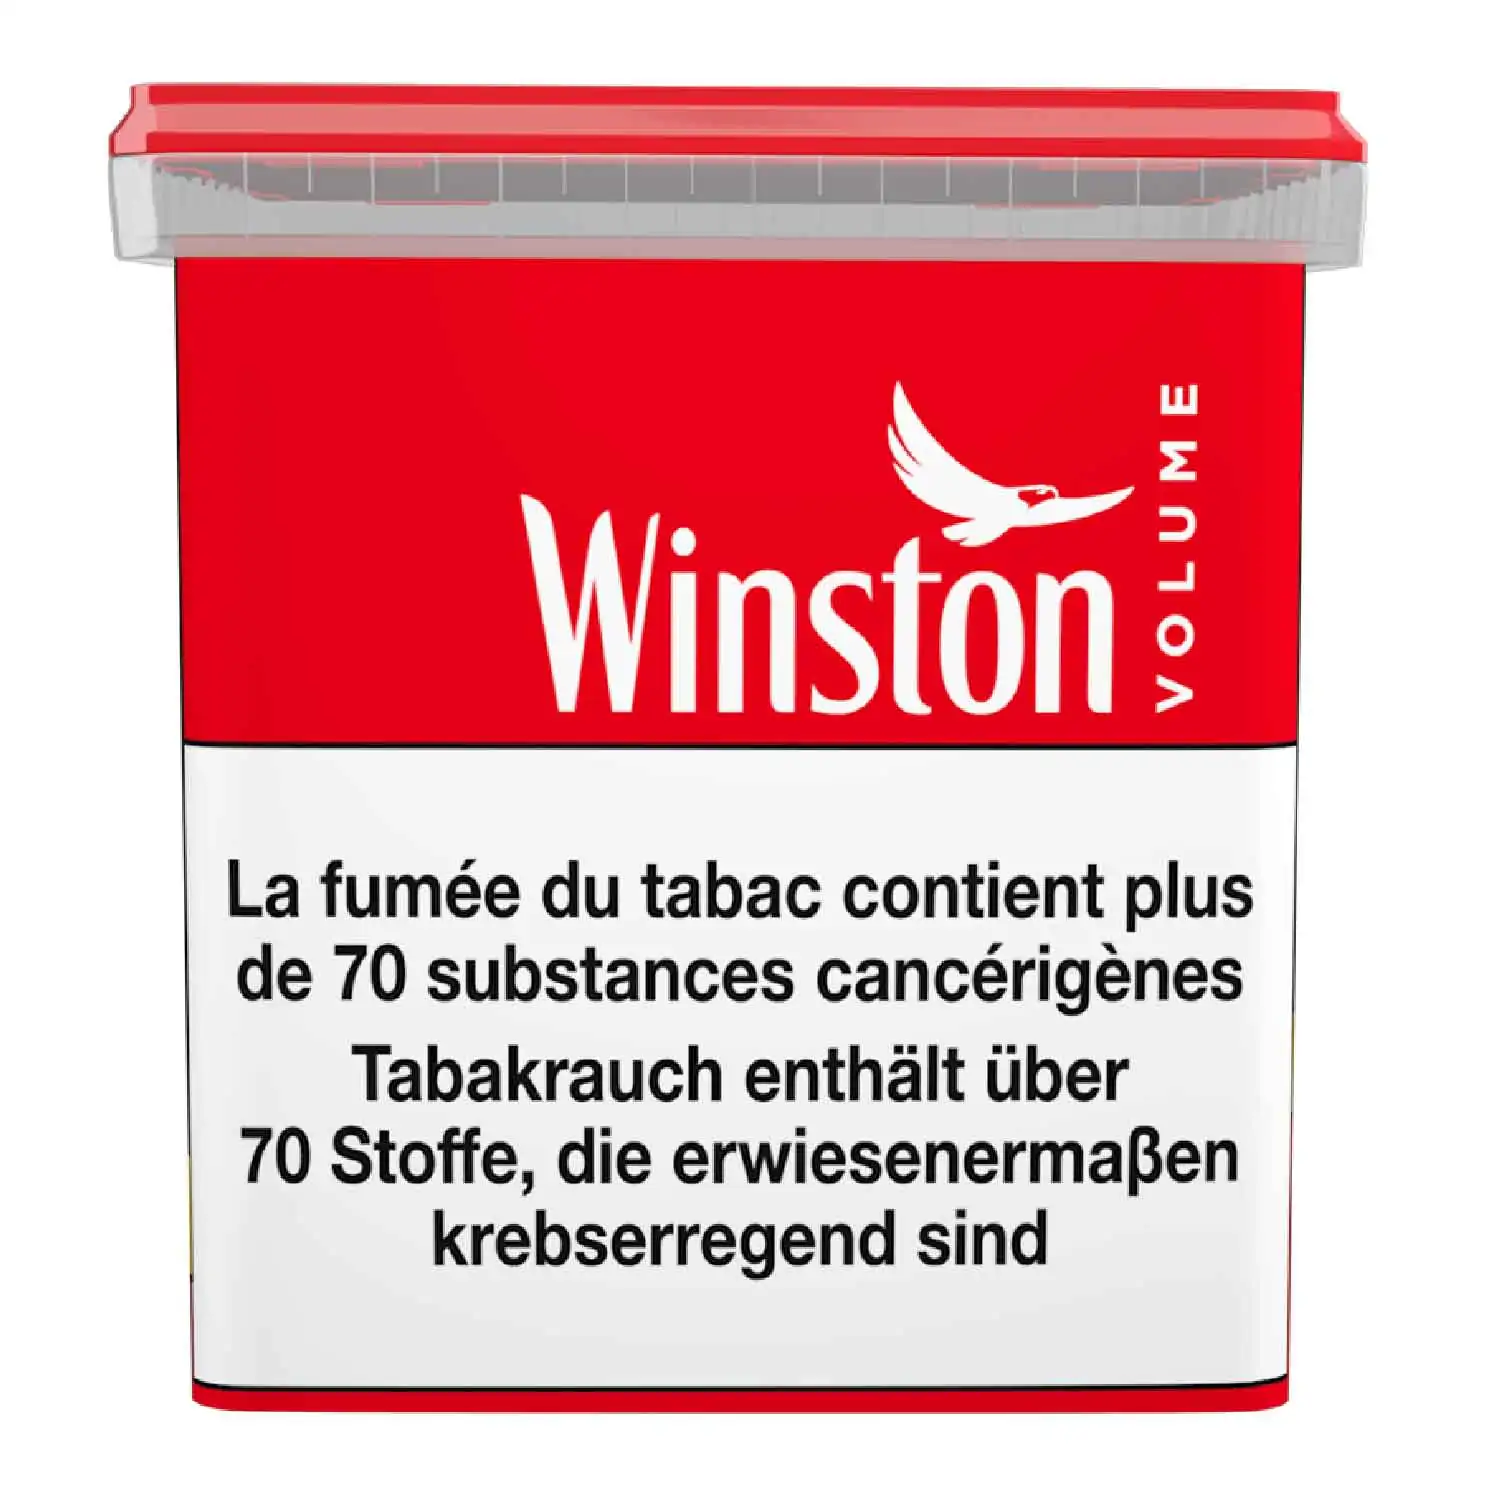 Winston volume rouge 650g - Buy at Real Tobacco